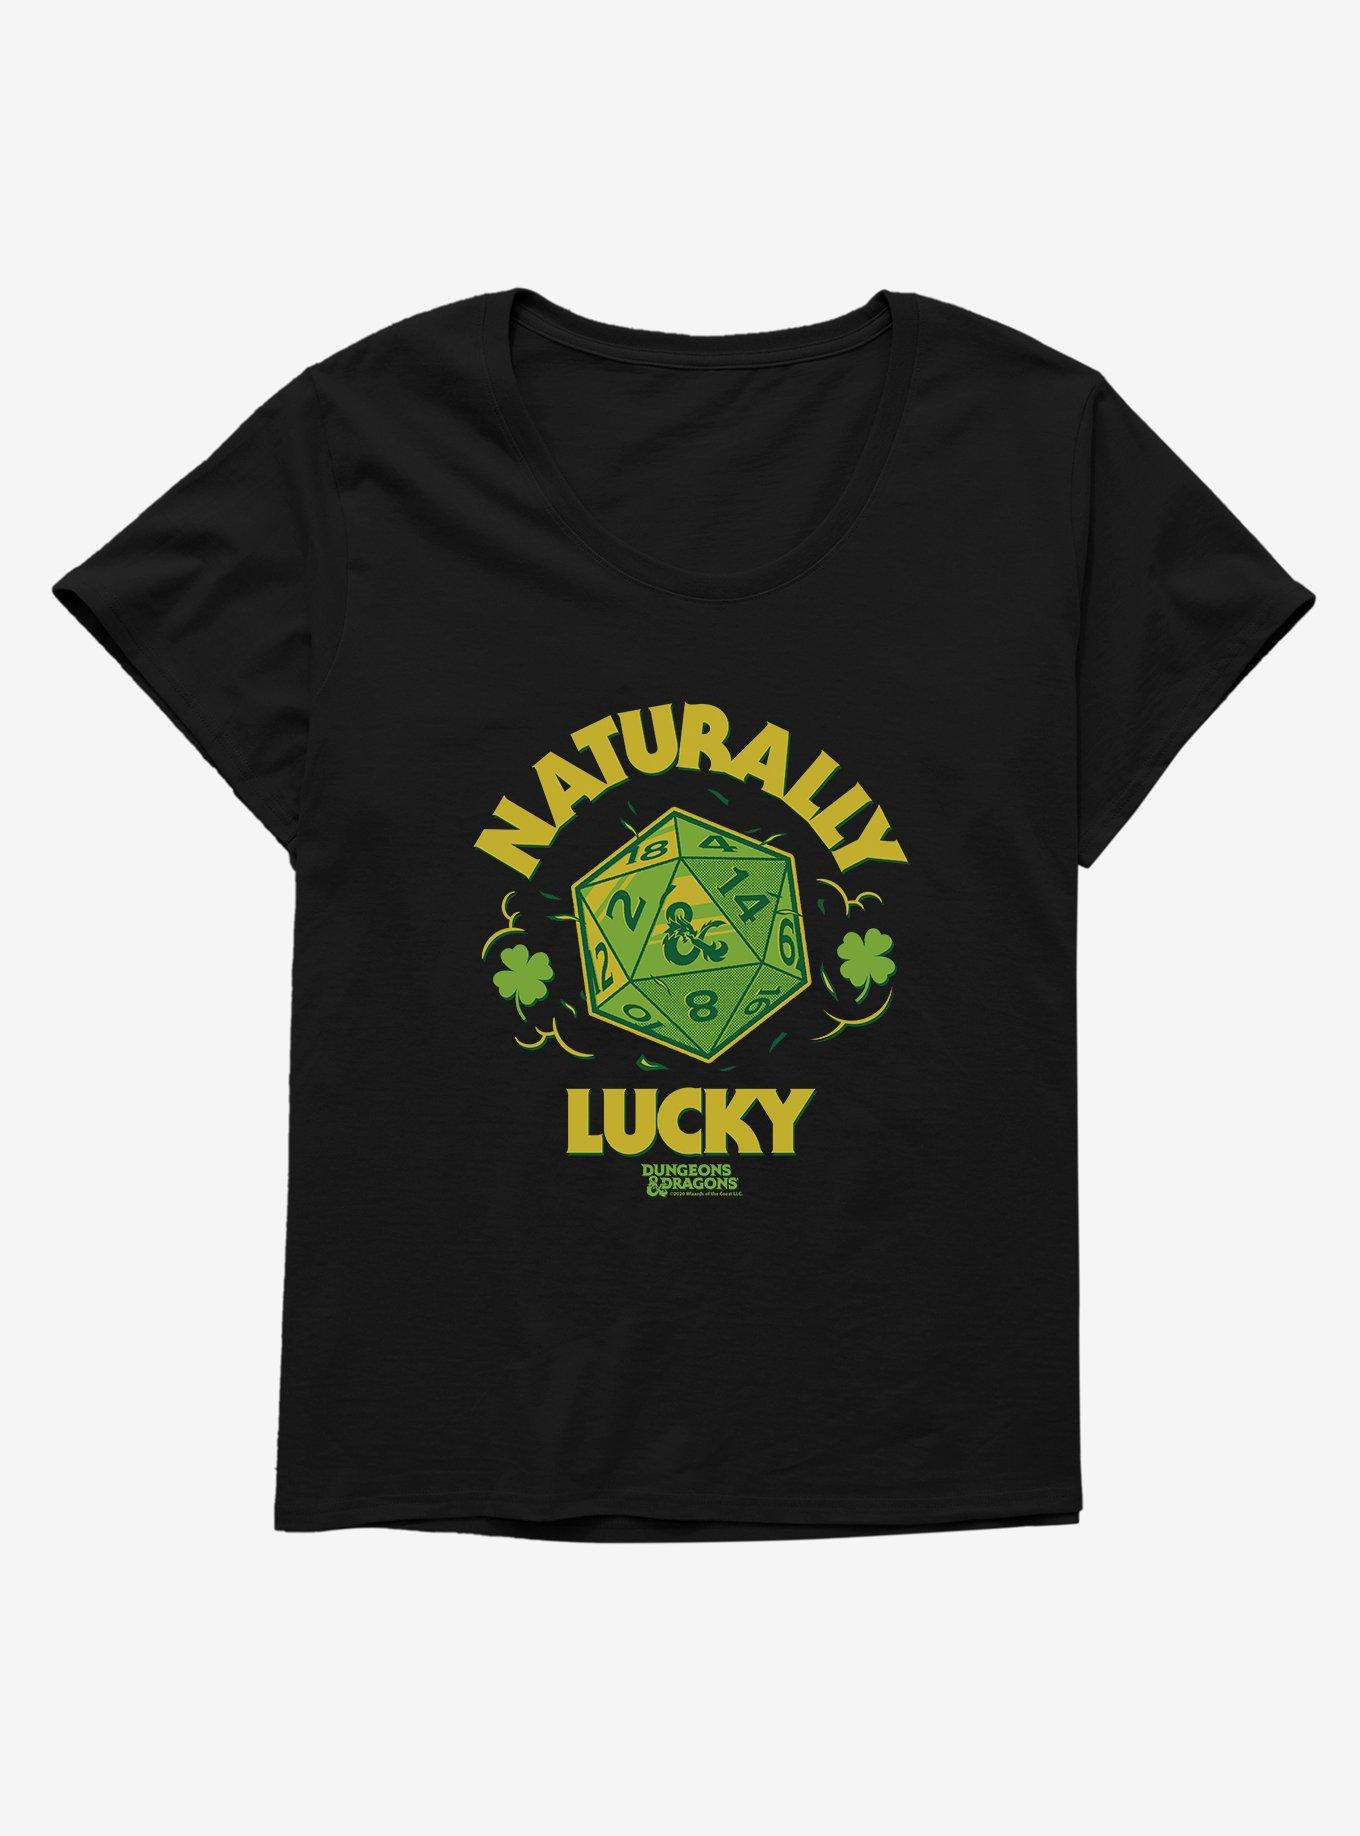 Dungeons & Dragons Naturally Lucky Dice Girls T-Shirt Plus Size, BLACK, hi-res